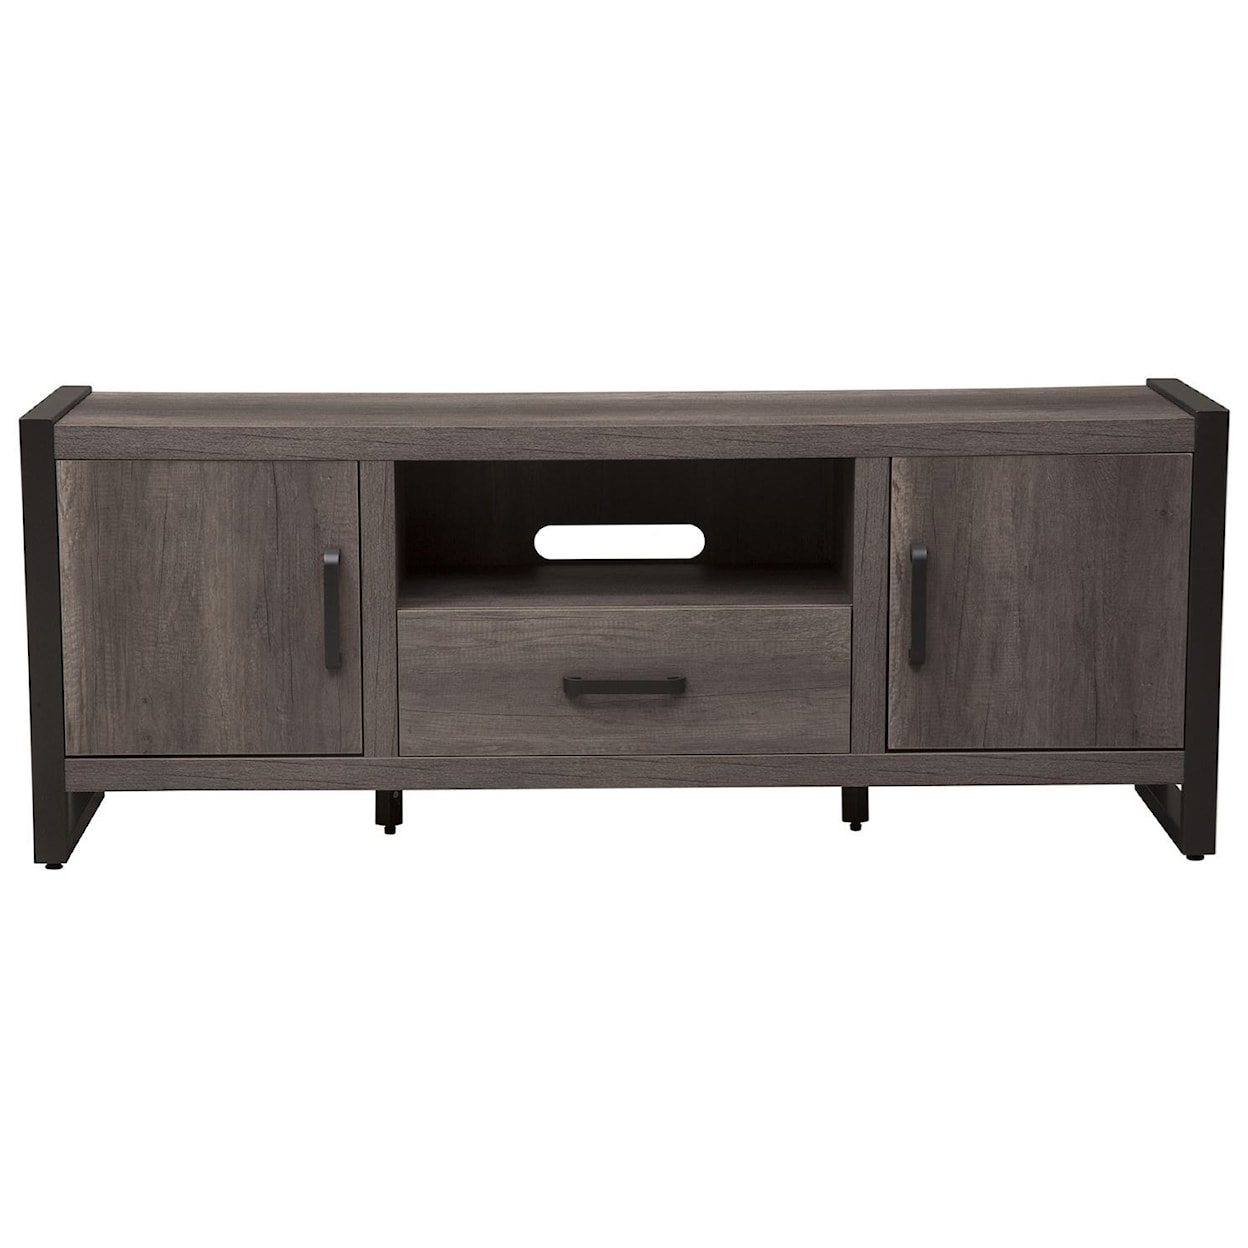 Liberty Furniture Tanners Creek Entertainment TV Stand